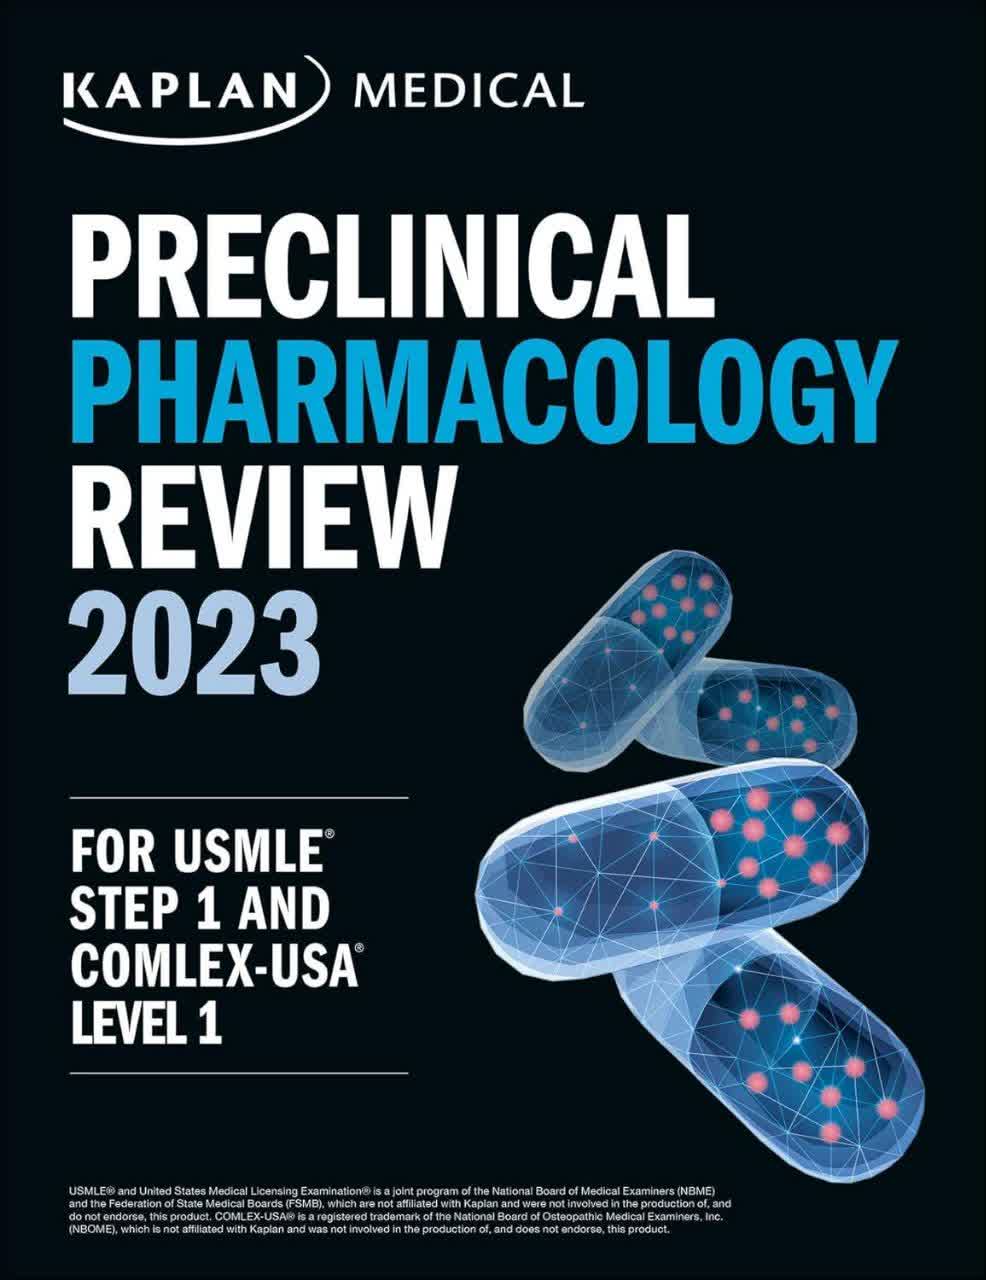 Preclinical pharmacology Review 2023